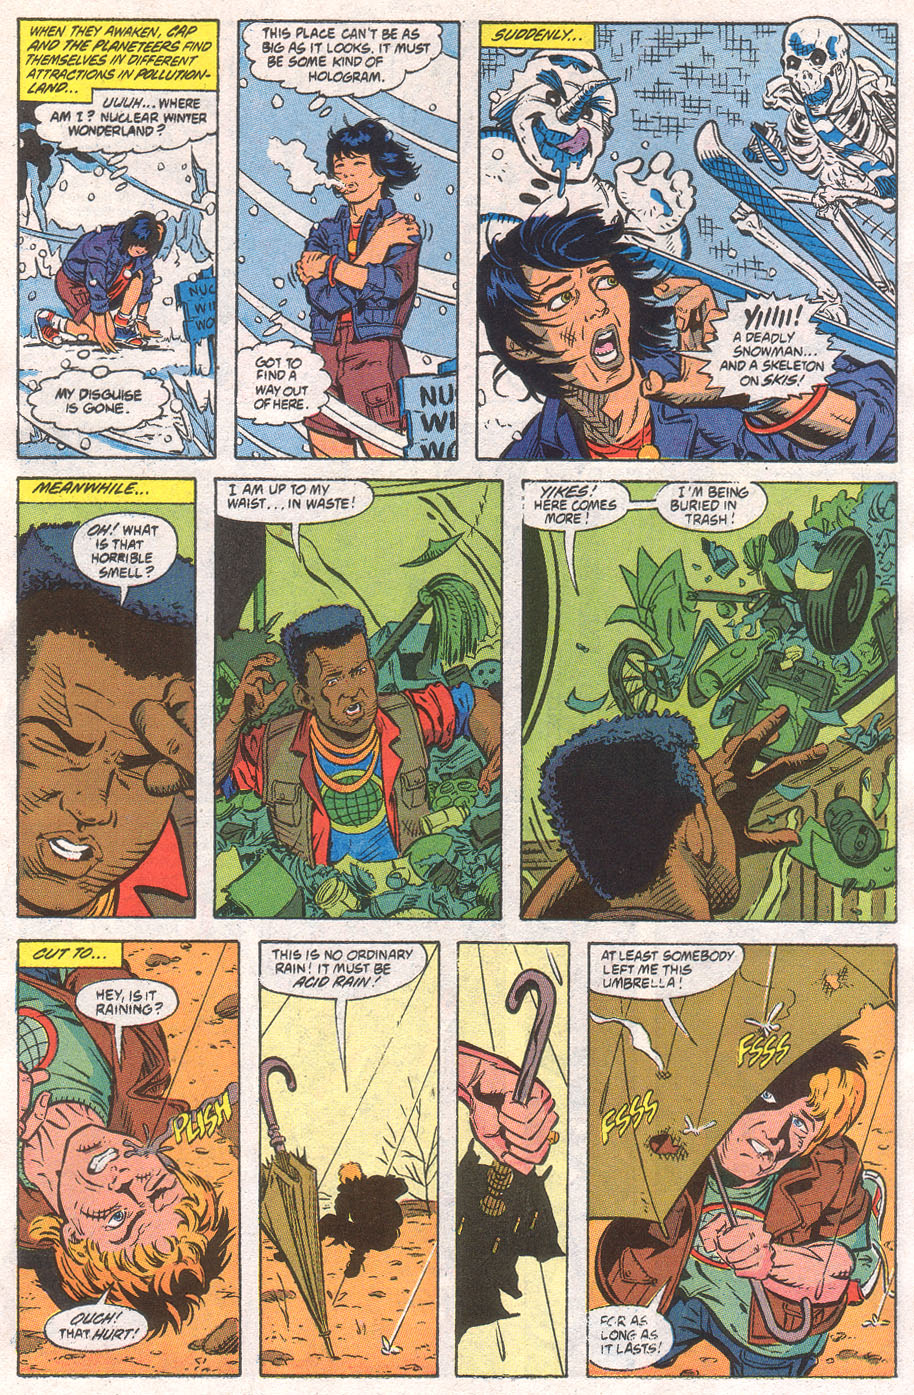 Captain Planet and the Planeteers 5 Page 13